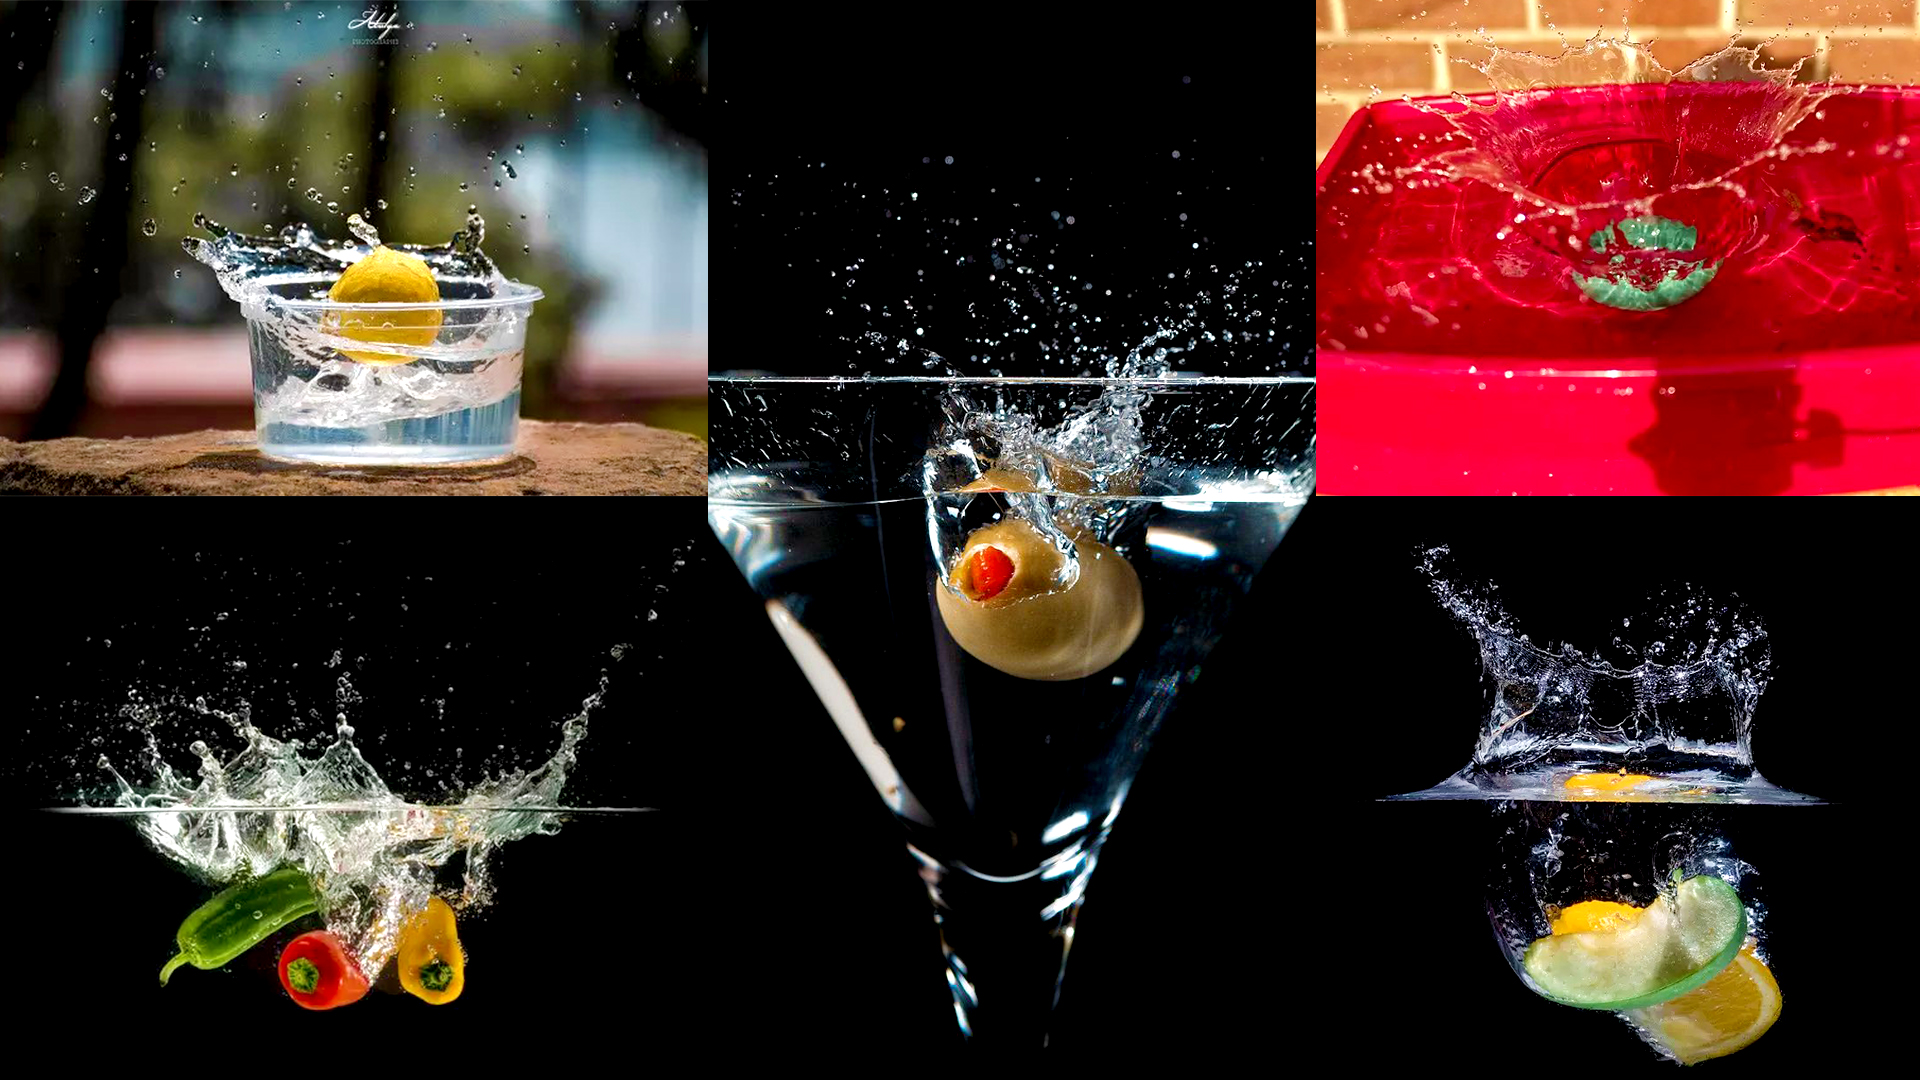 Start Shooting at Home to Understand High-Speed Photography